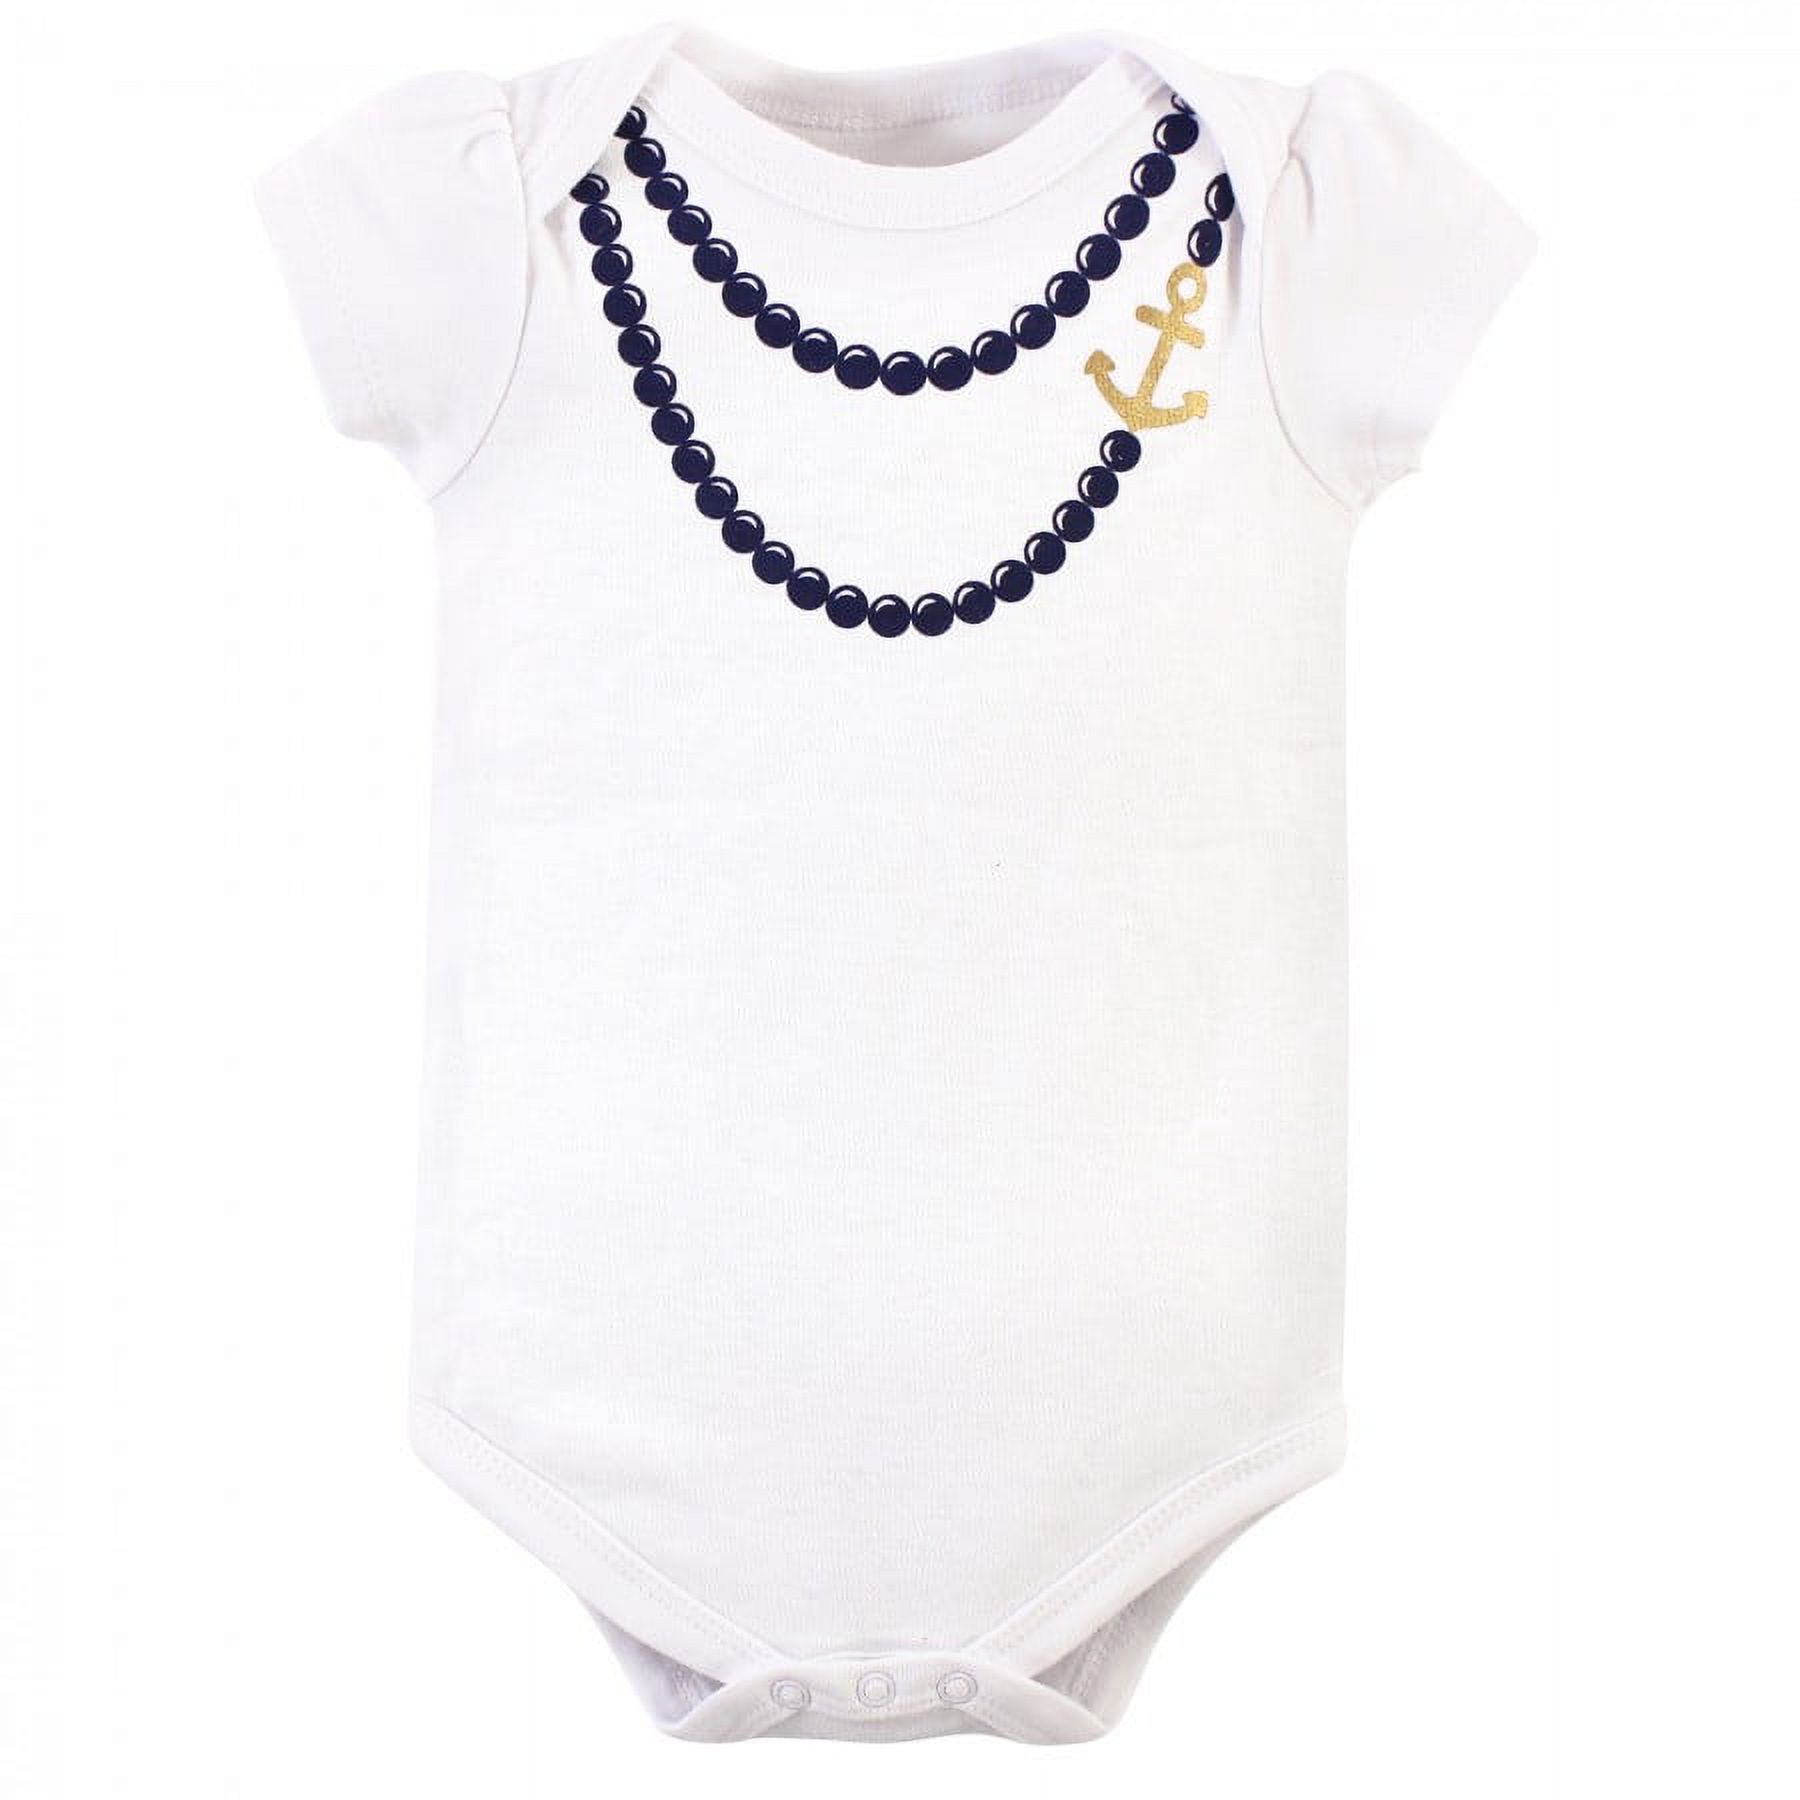 Little Treasure Baby Girl Cotton Bodysuit, Pant and Shoe 3pc Set, Anchor Necklace, 6-9 Months - image 4 of 4